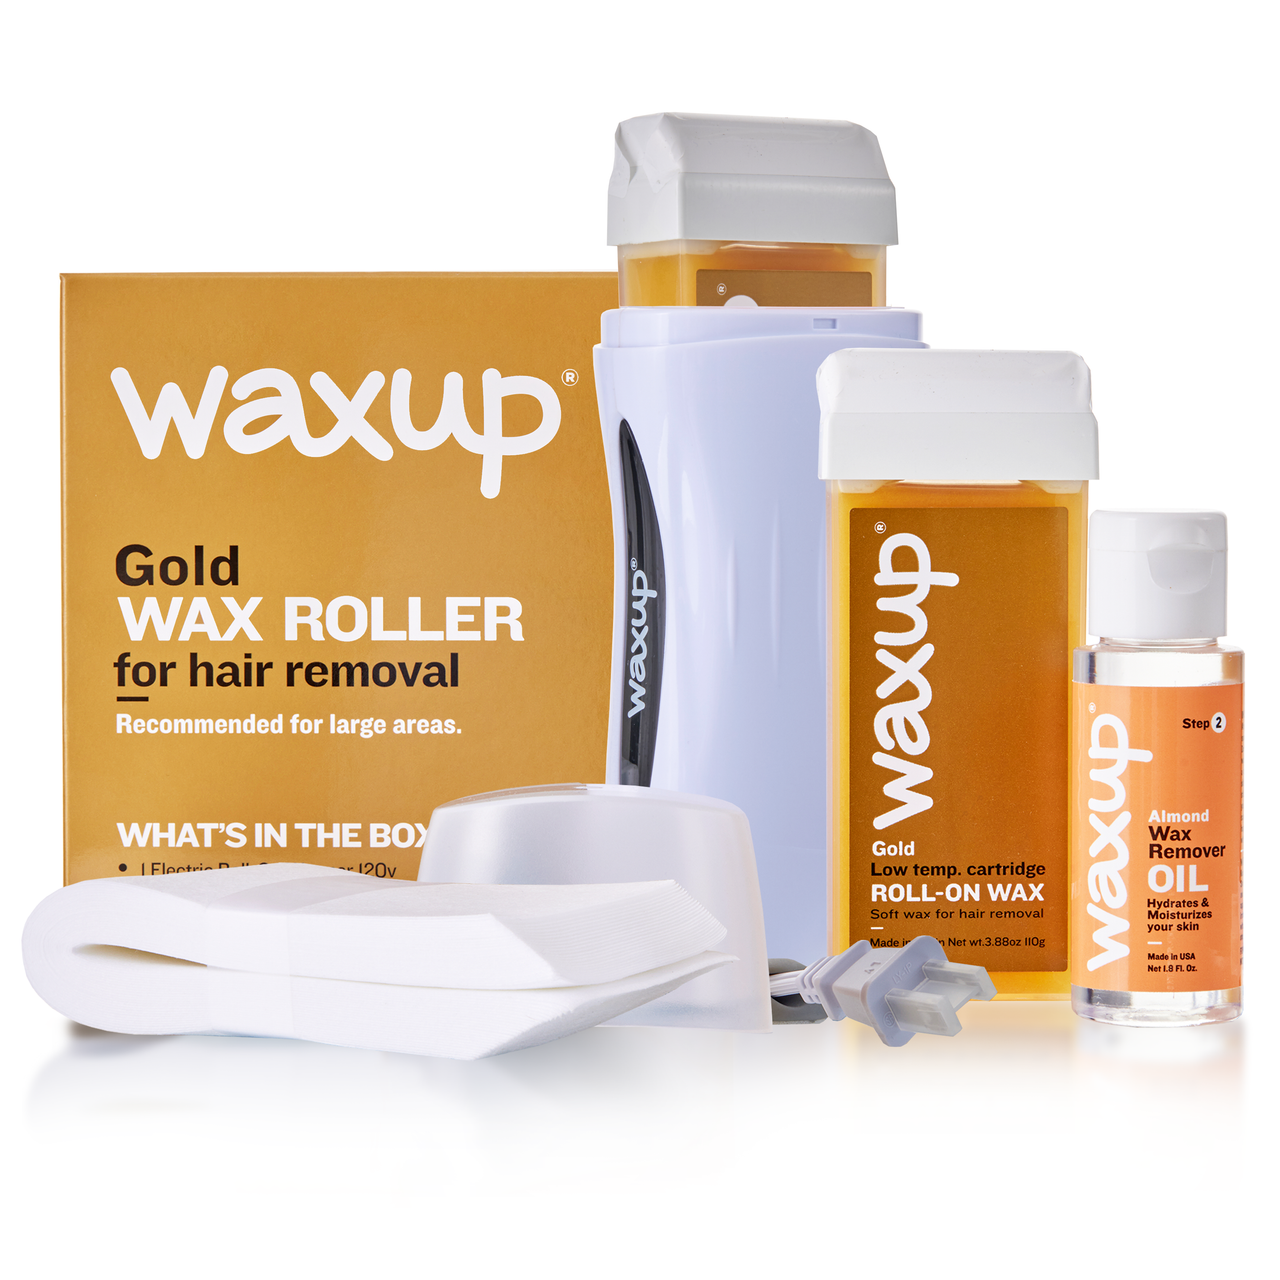 Elite Gold Roller Waxing Kit - thatswaxup -  - Roller Waxing Kit - waxup hair removal wax body waxing kit women and men professional waxing supplies